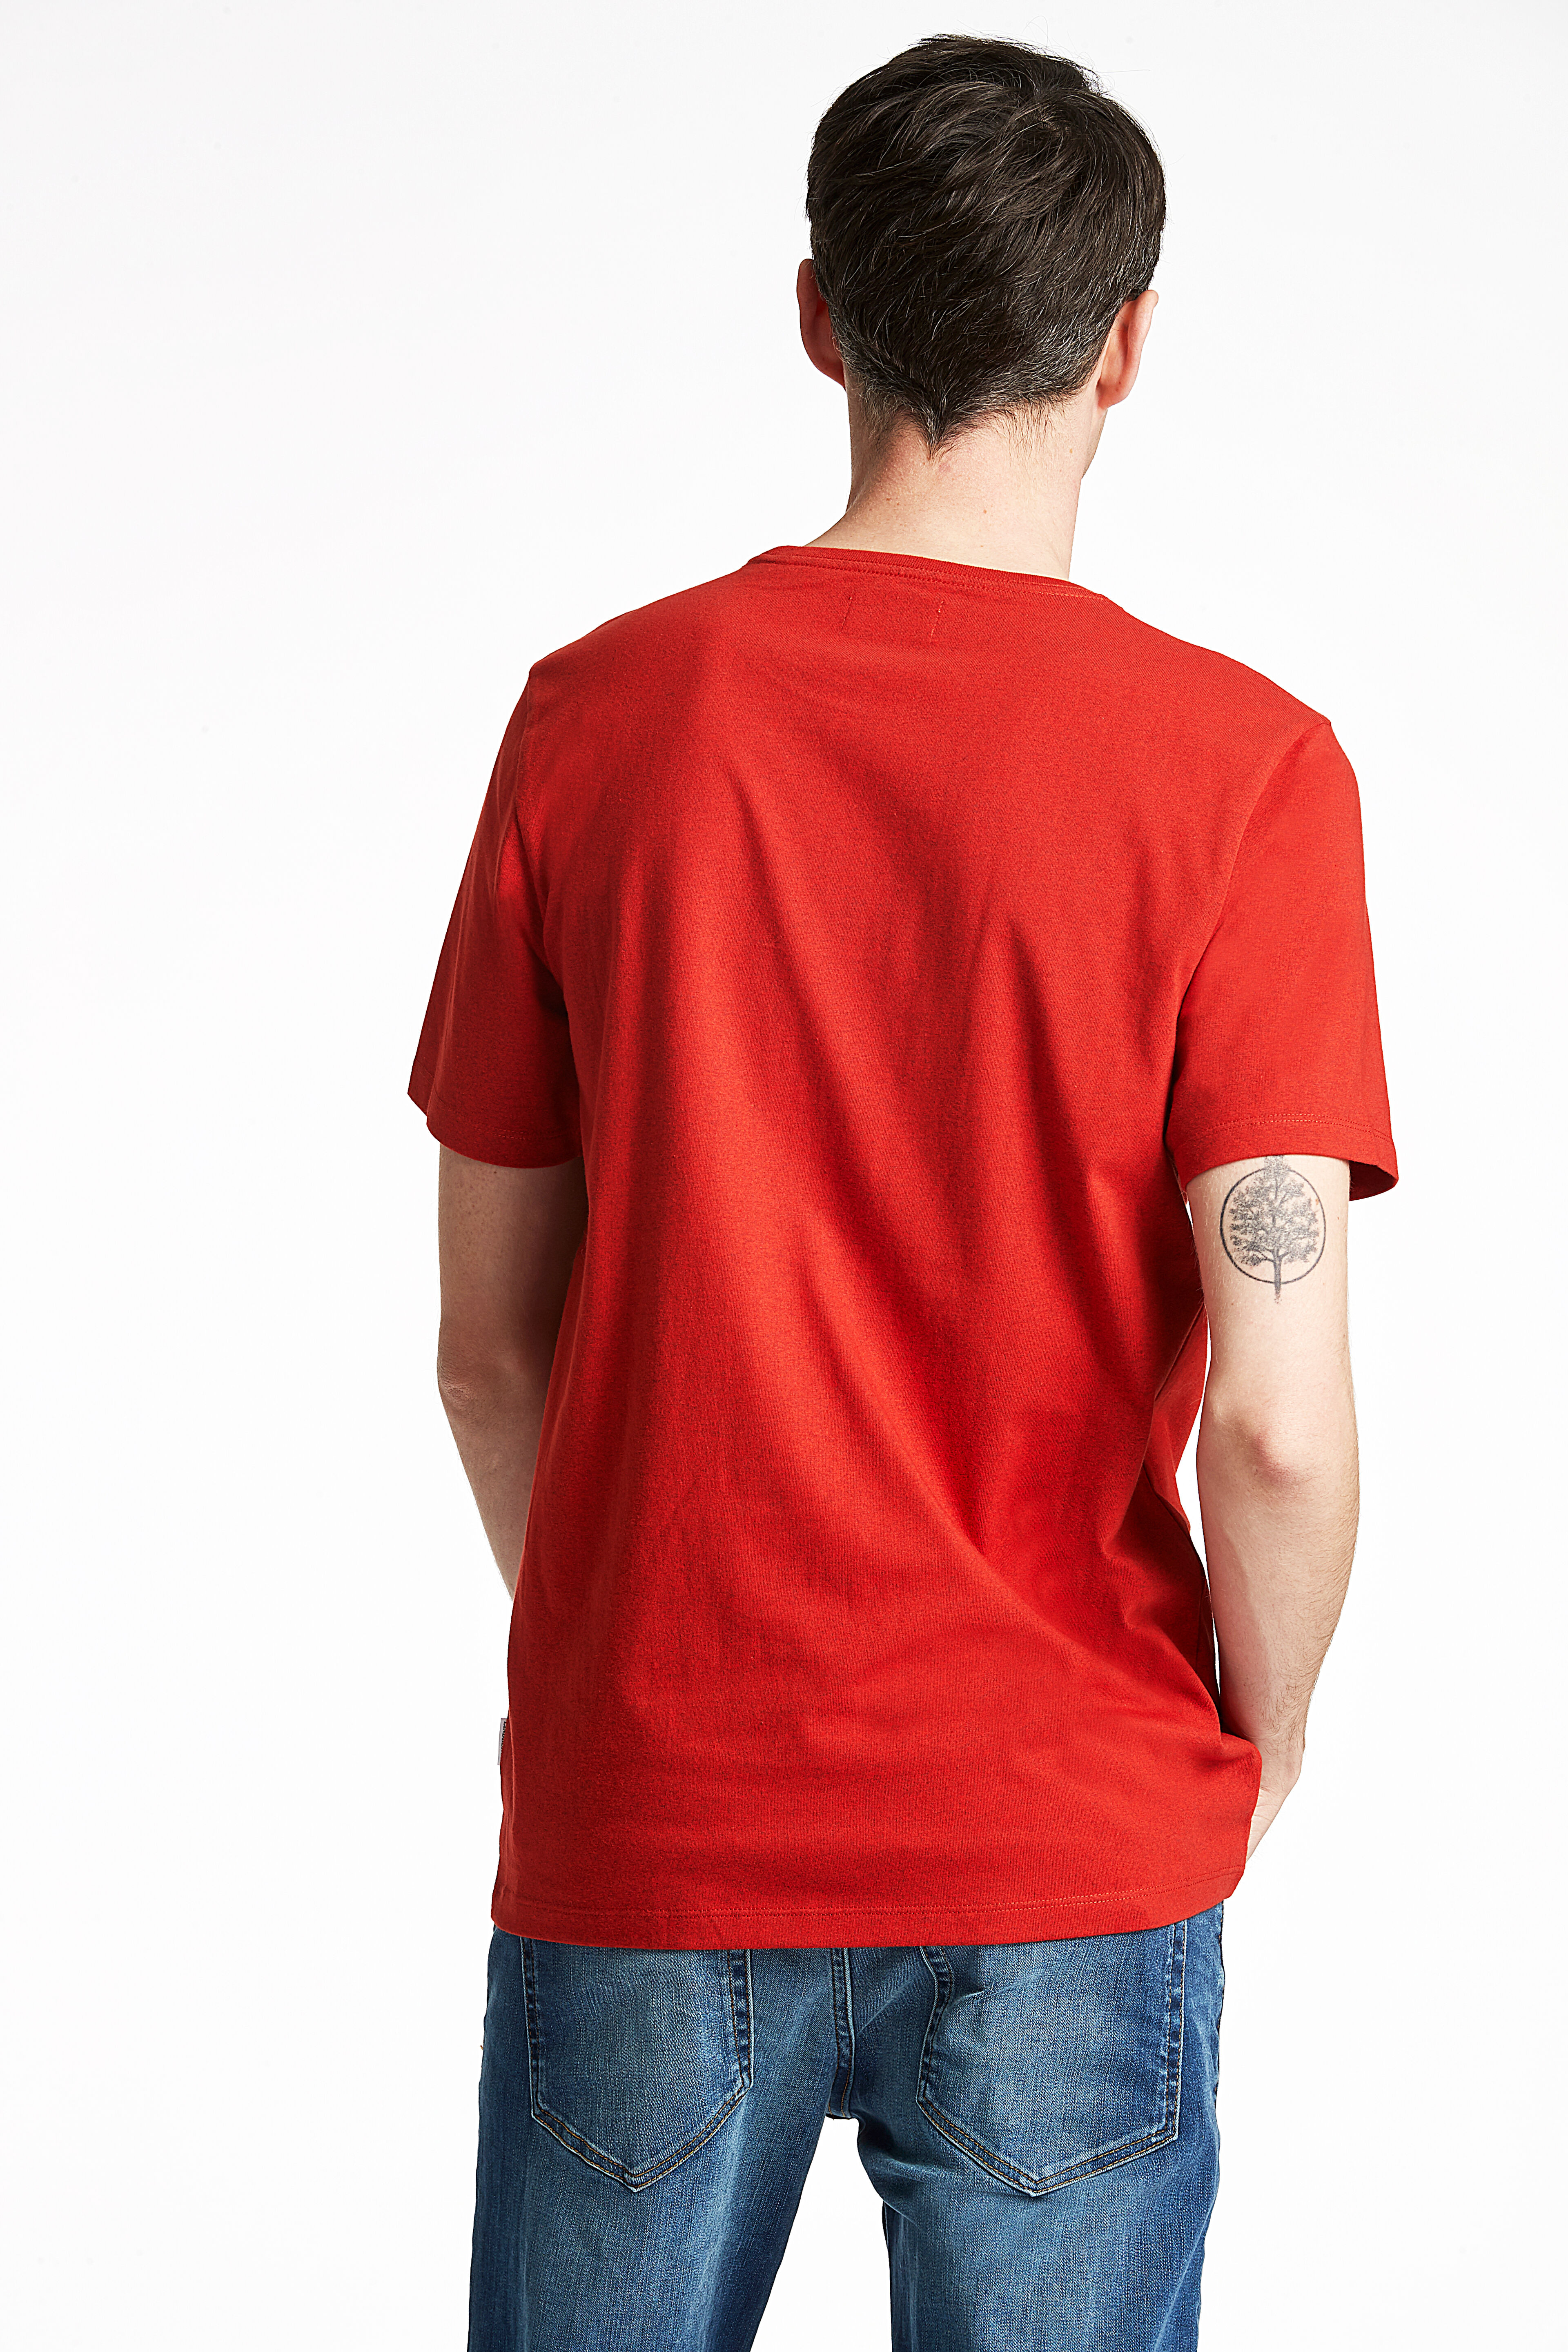 Tee | Relaxed fit 30-48044